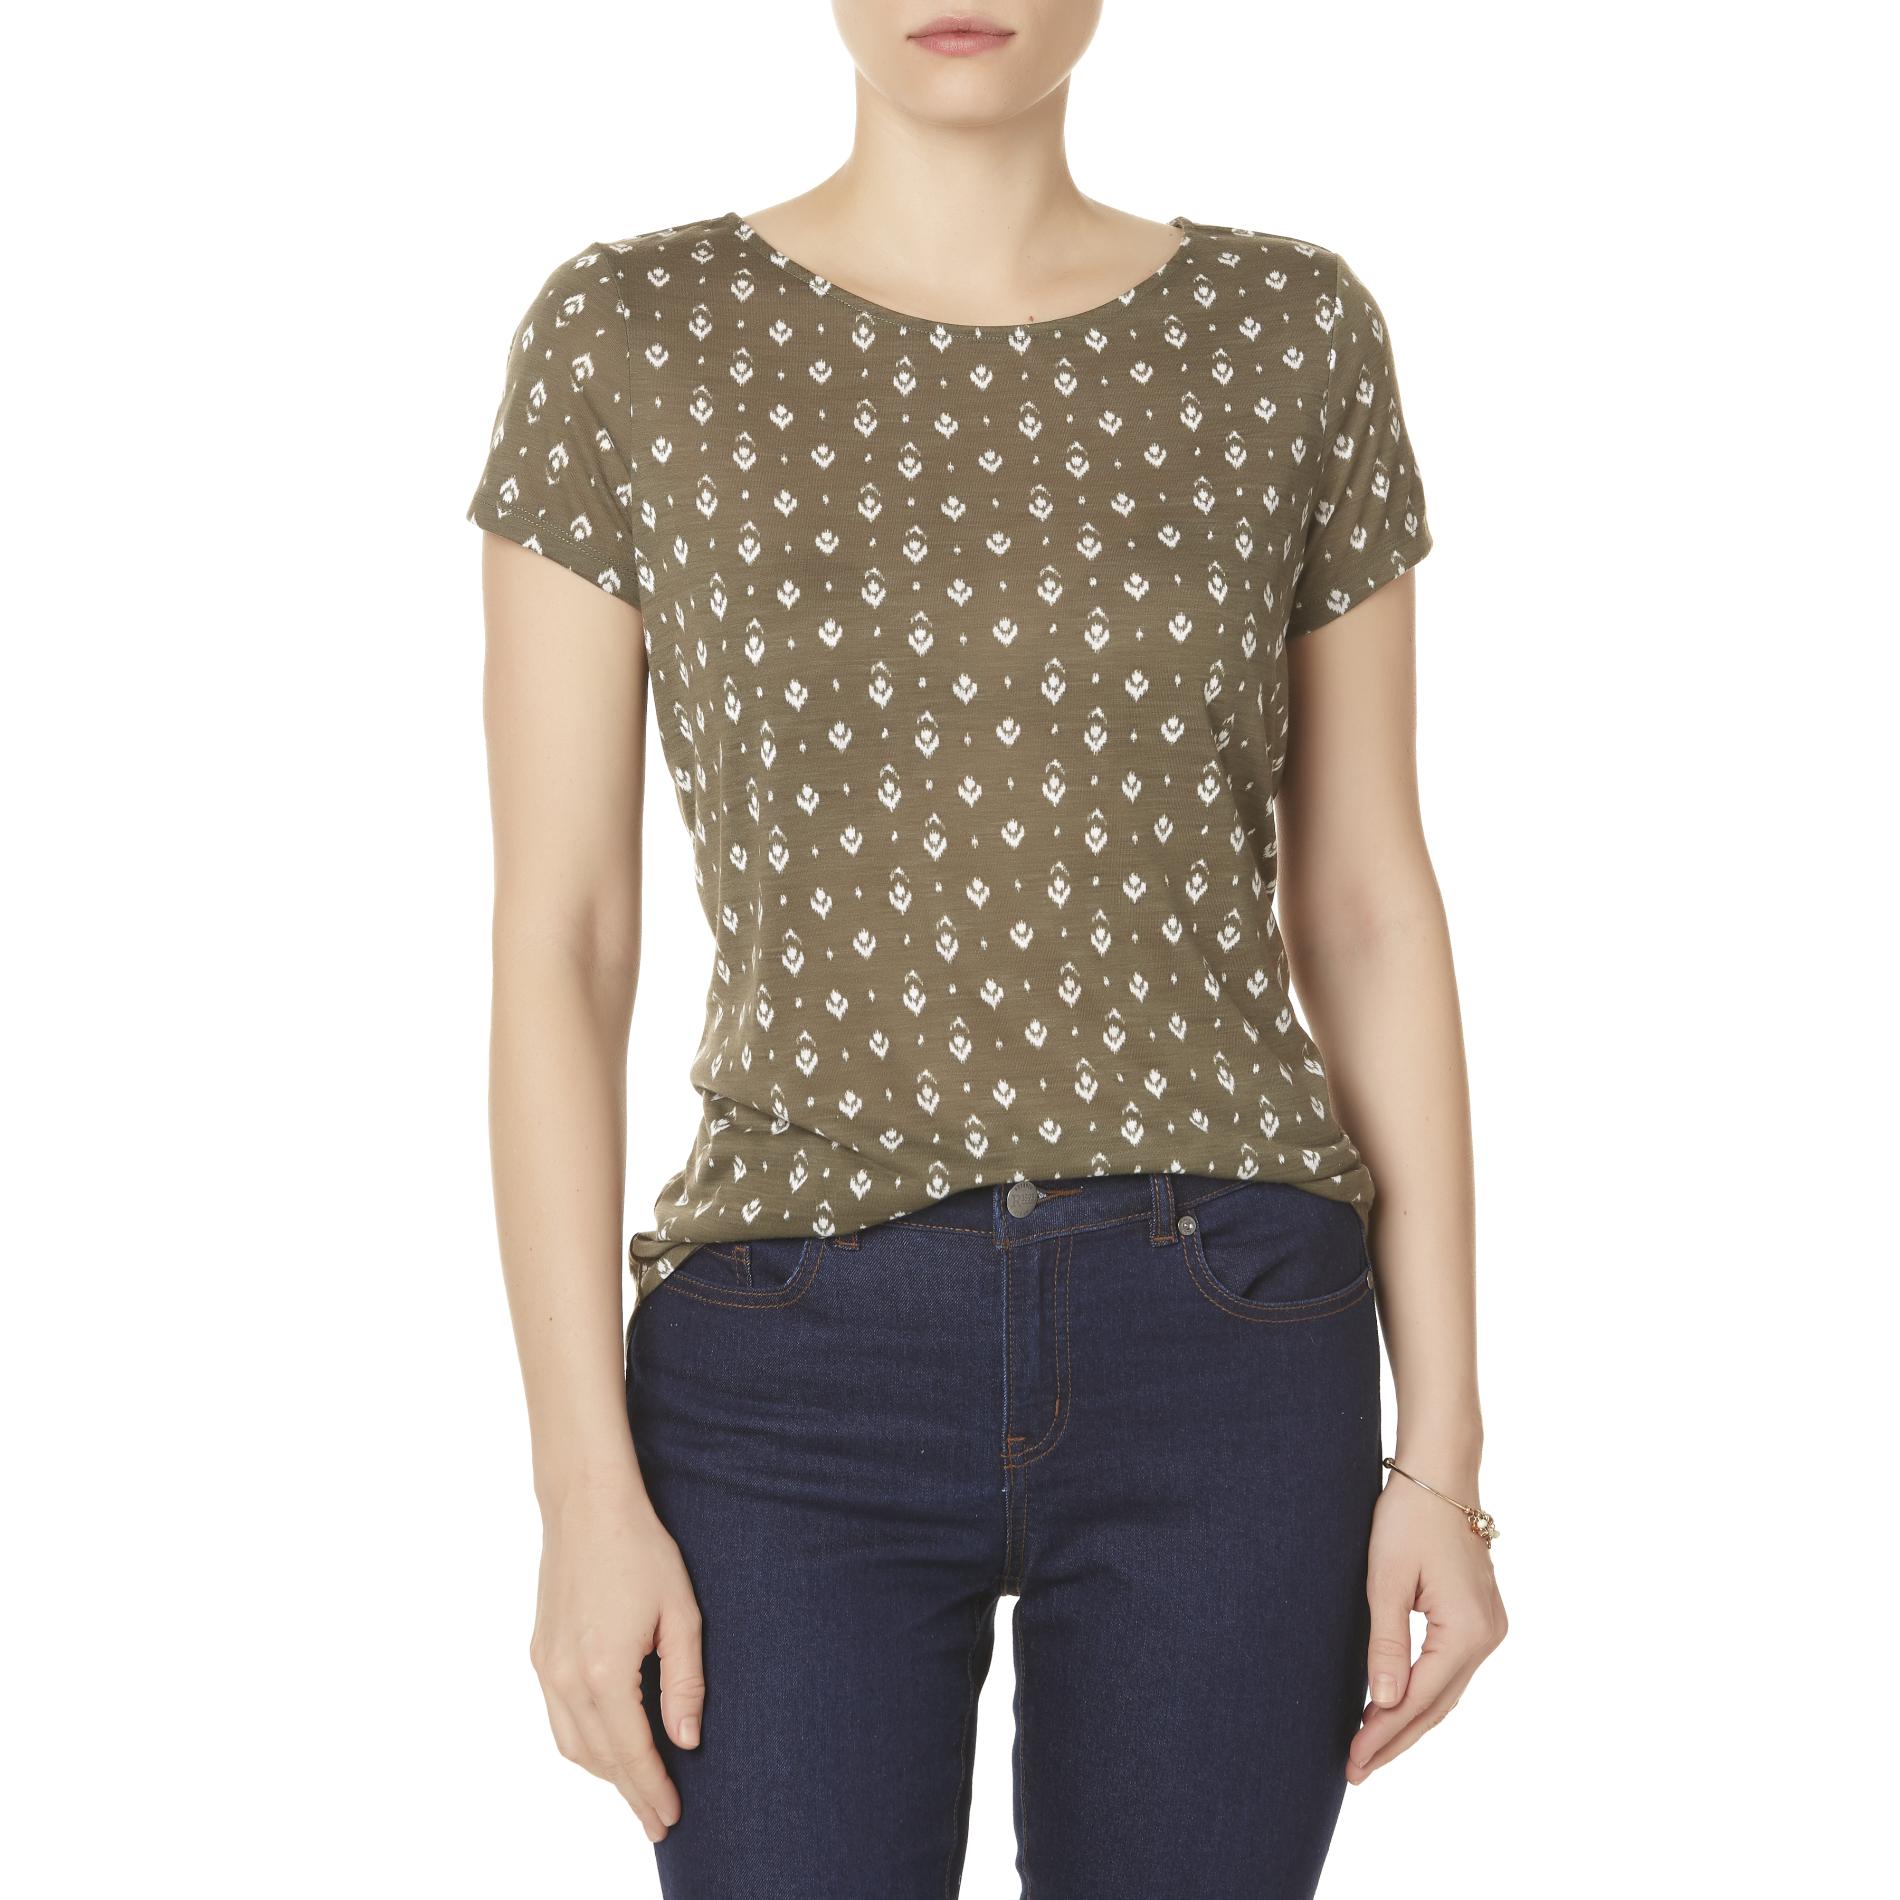 Simply Styled Women's T-Shirt - Ikat